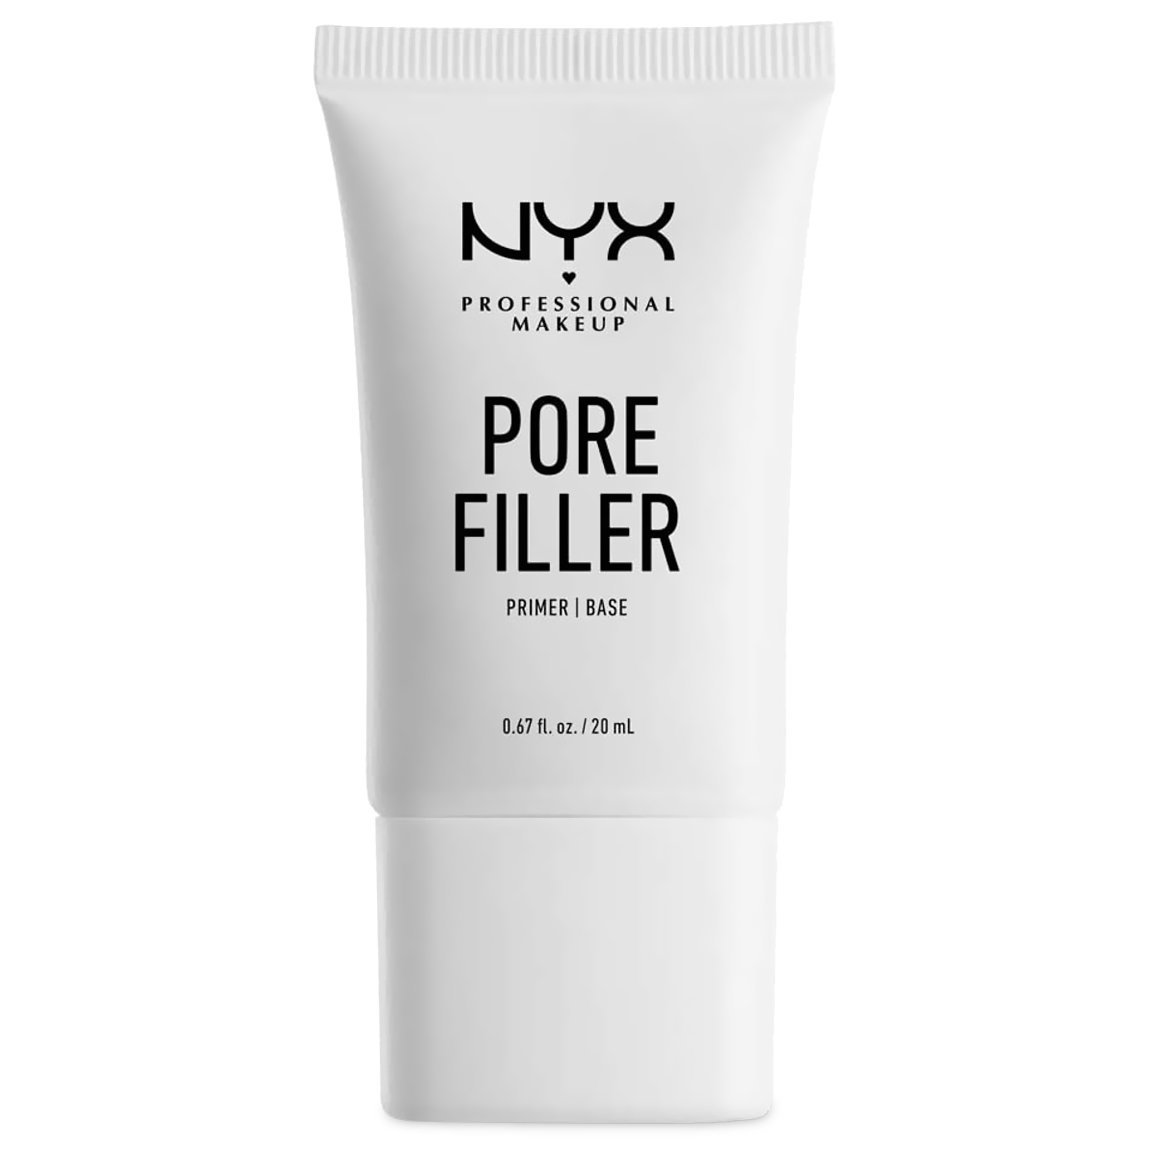 NYX Professional Makeup Pore Filler alternative view 1 - product swatch.